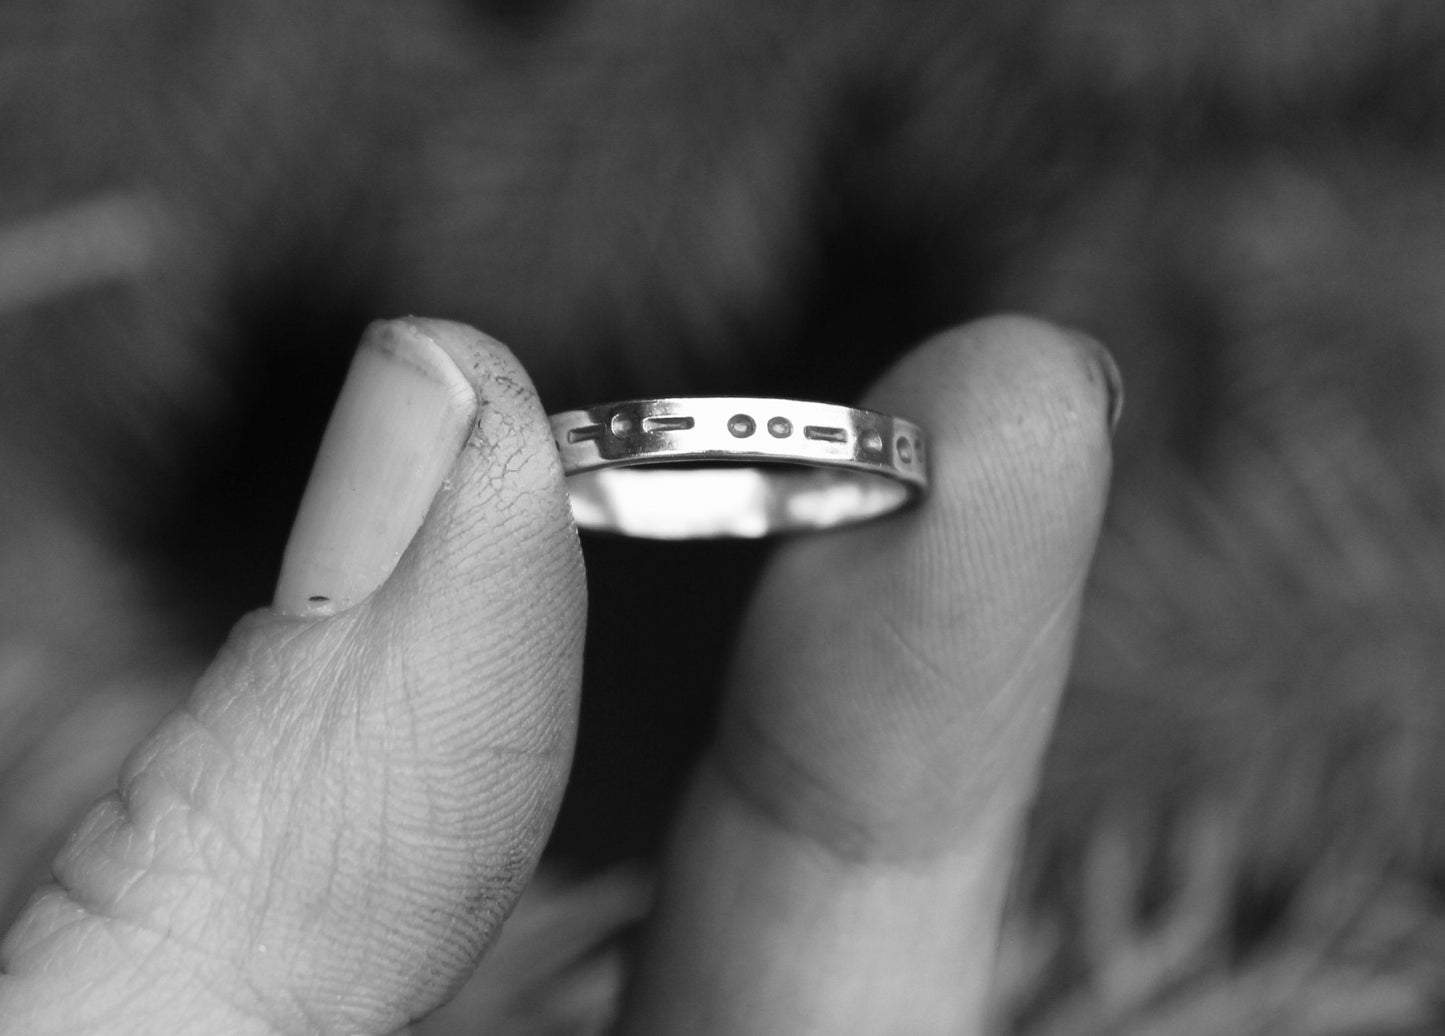 Family in Morse Code, Sterling Silver Ring